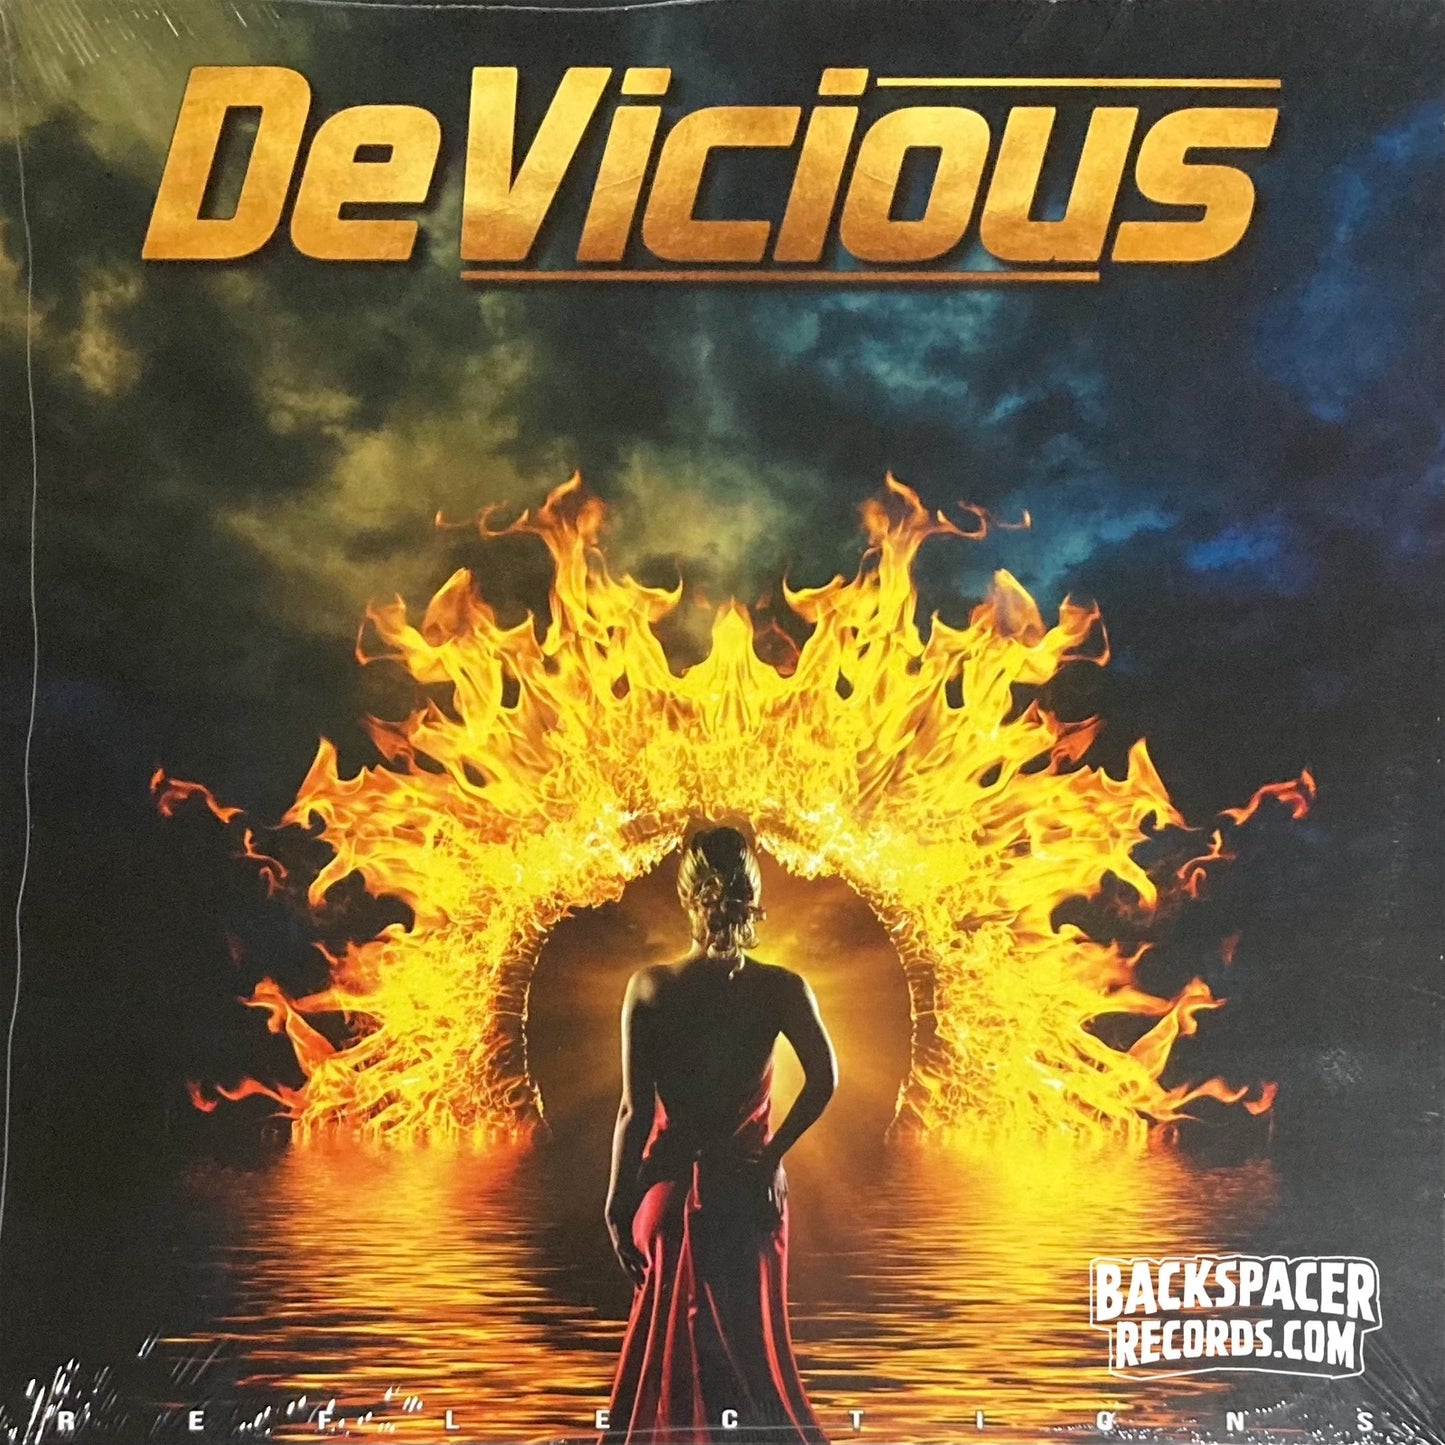 DeVicious - Reflections LP (Sealed)